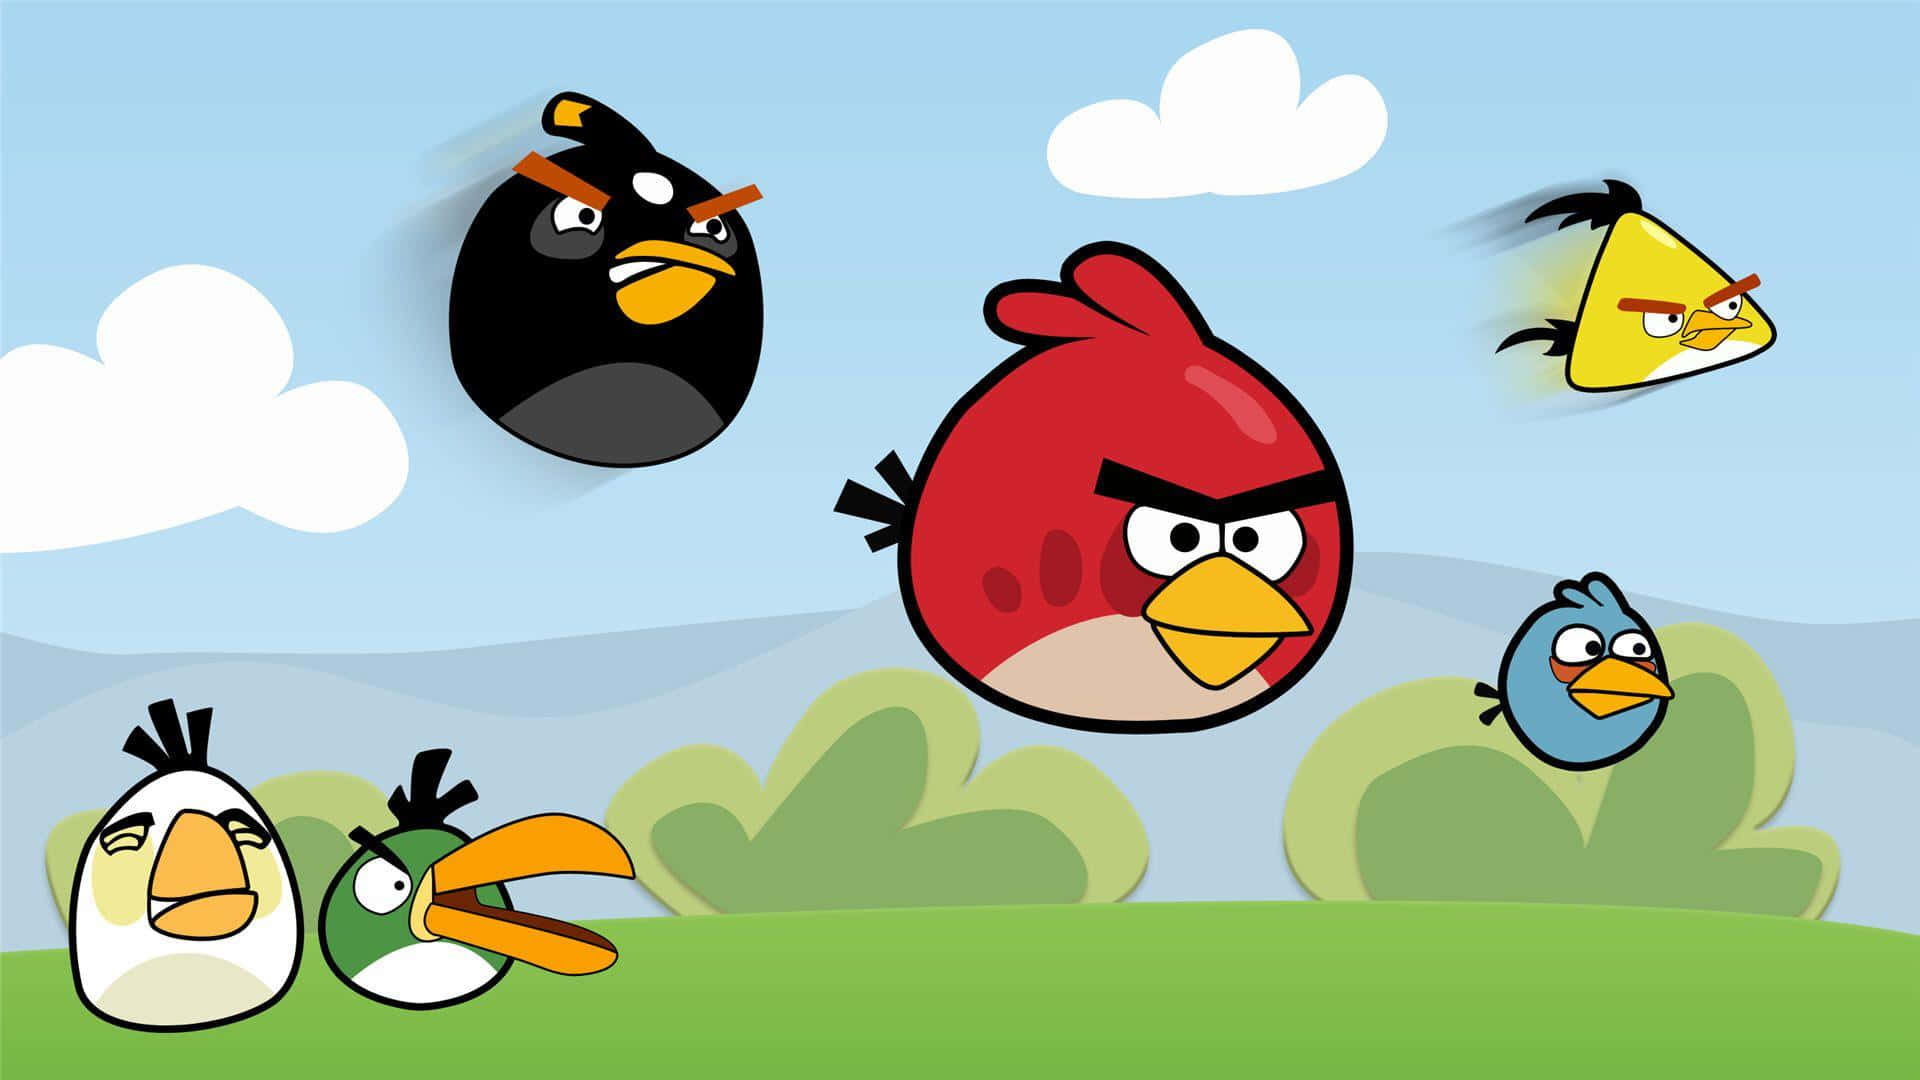 Angry Birds Characters Flyingand Ground Wallpaper